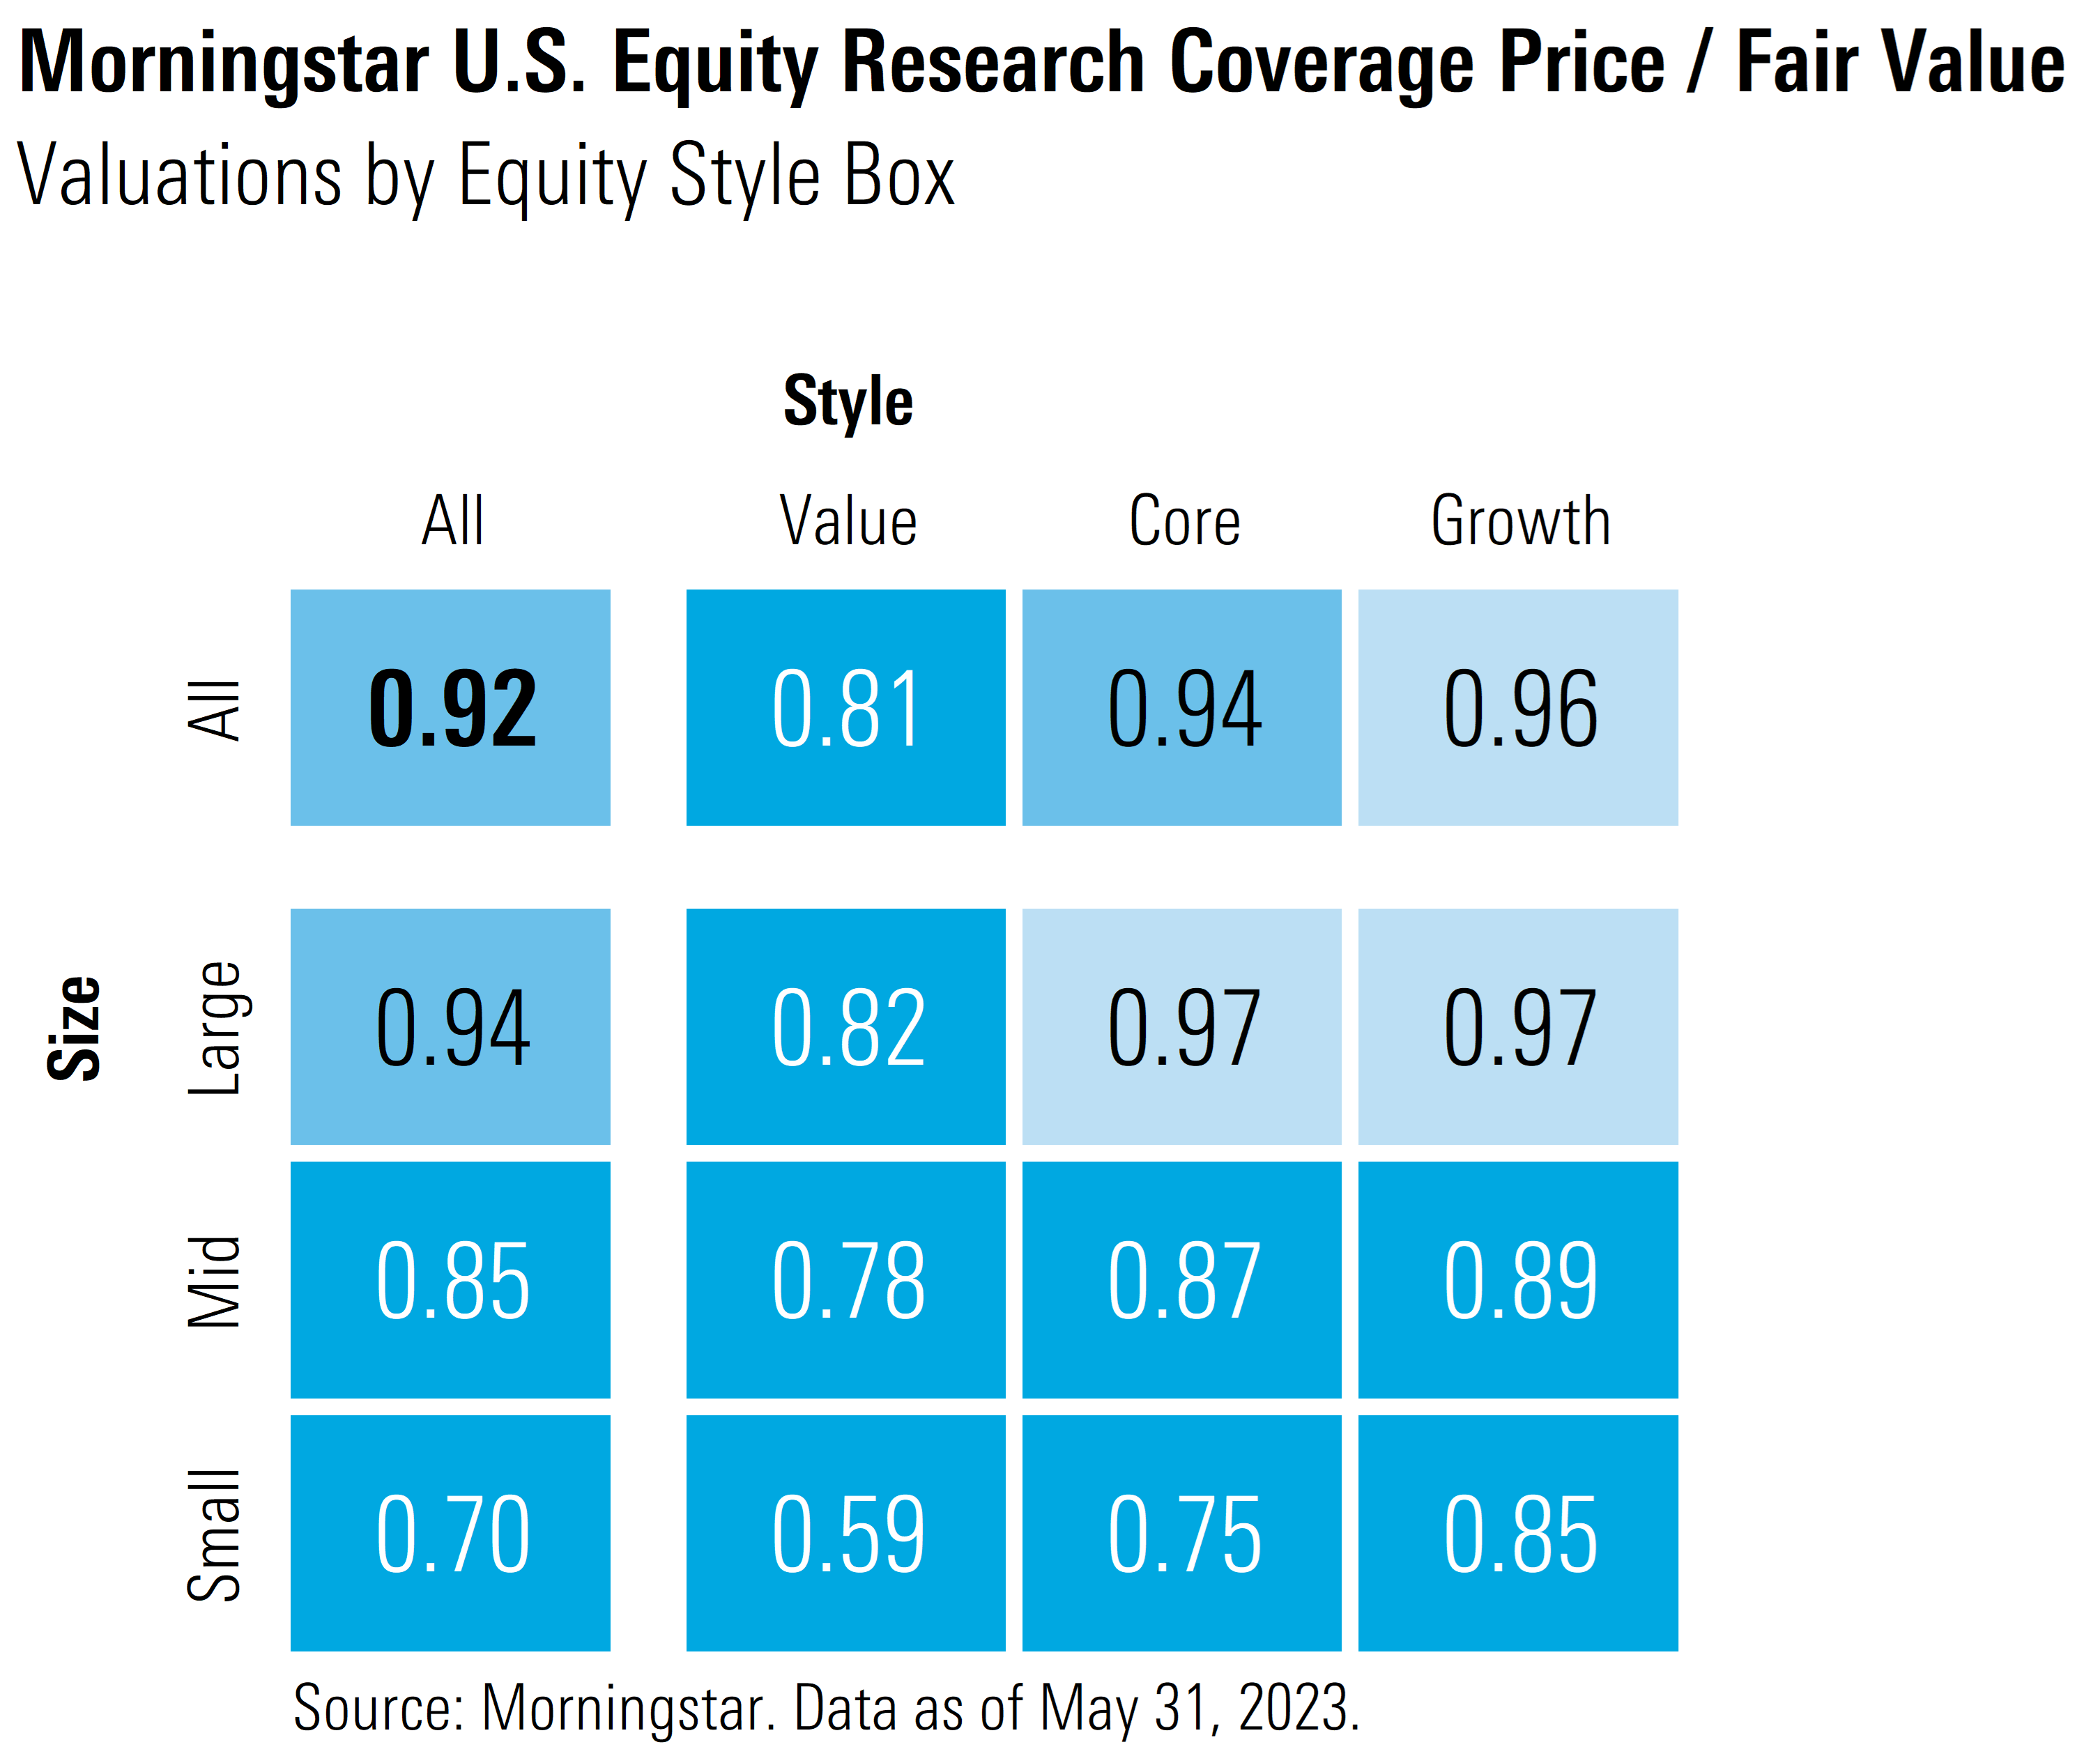 Graphic that contains Morningstar U.S. equity research coverage price to fair value by style box